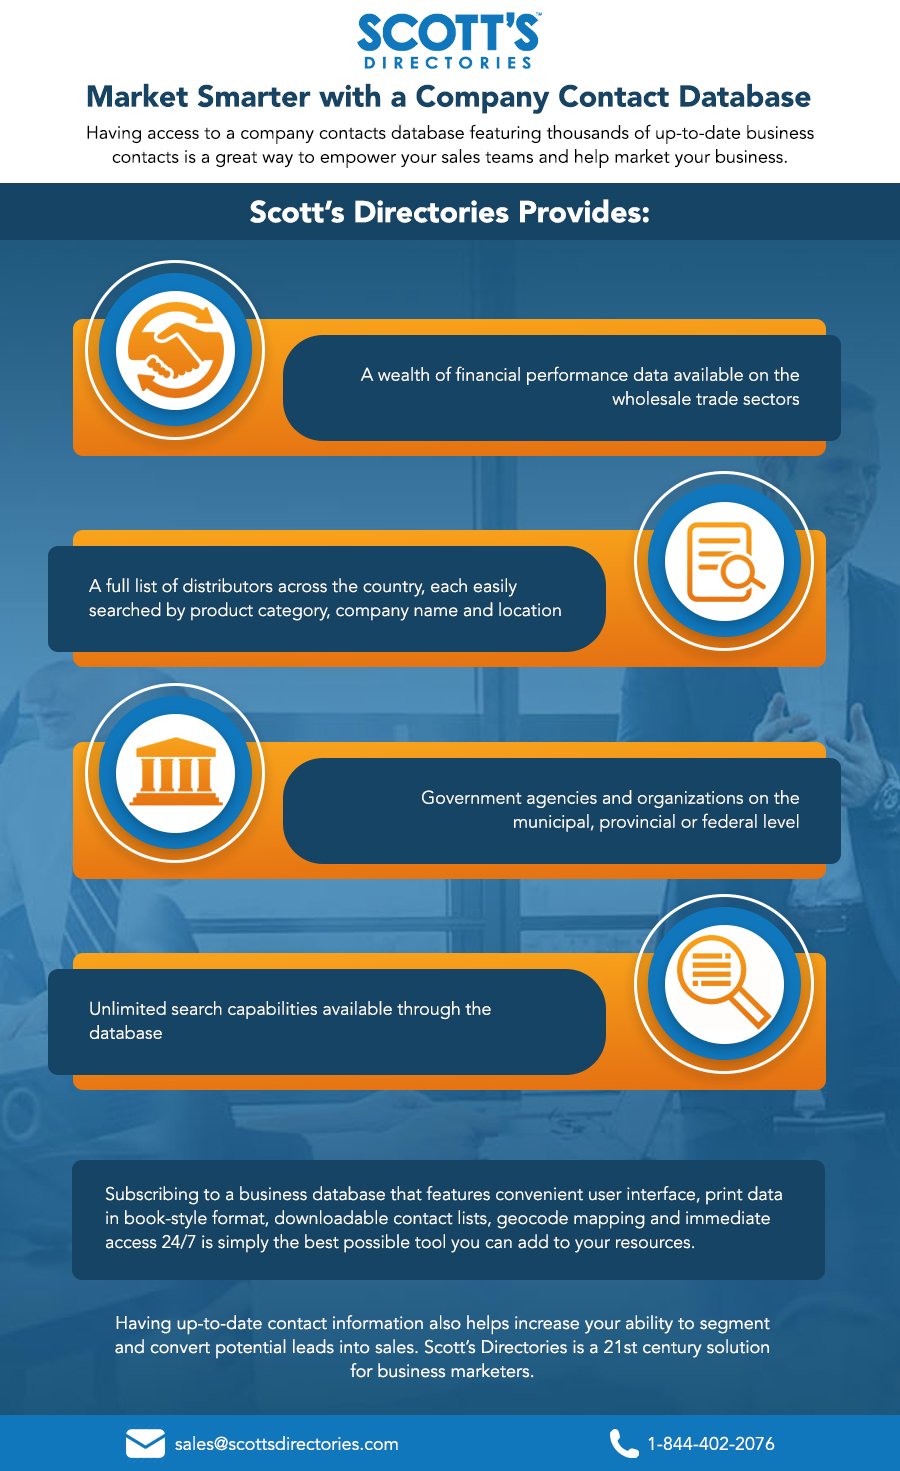 Market Smarter with a Company Contact Database - Infographic image